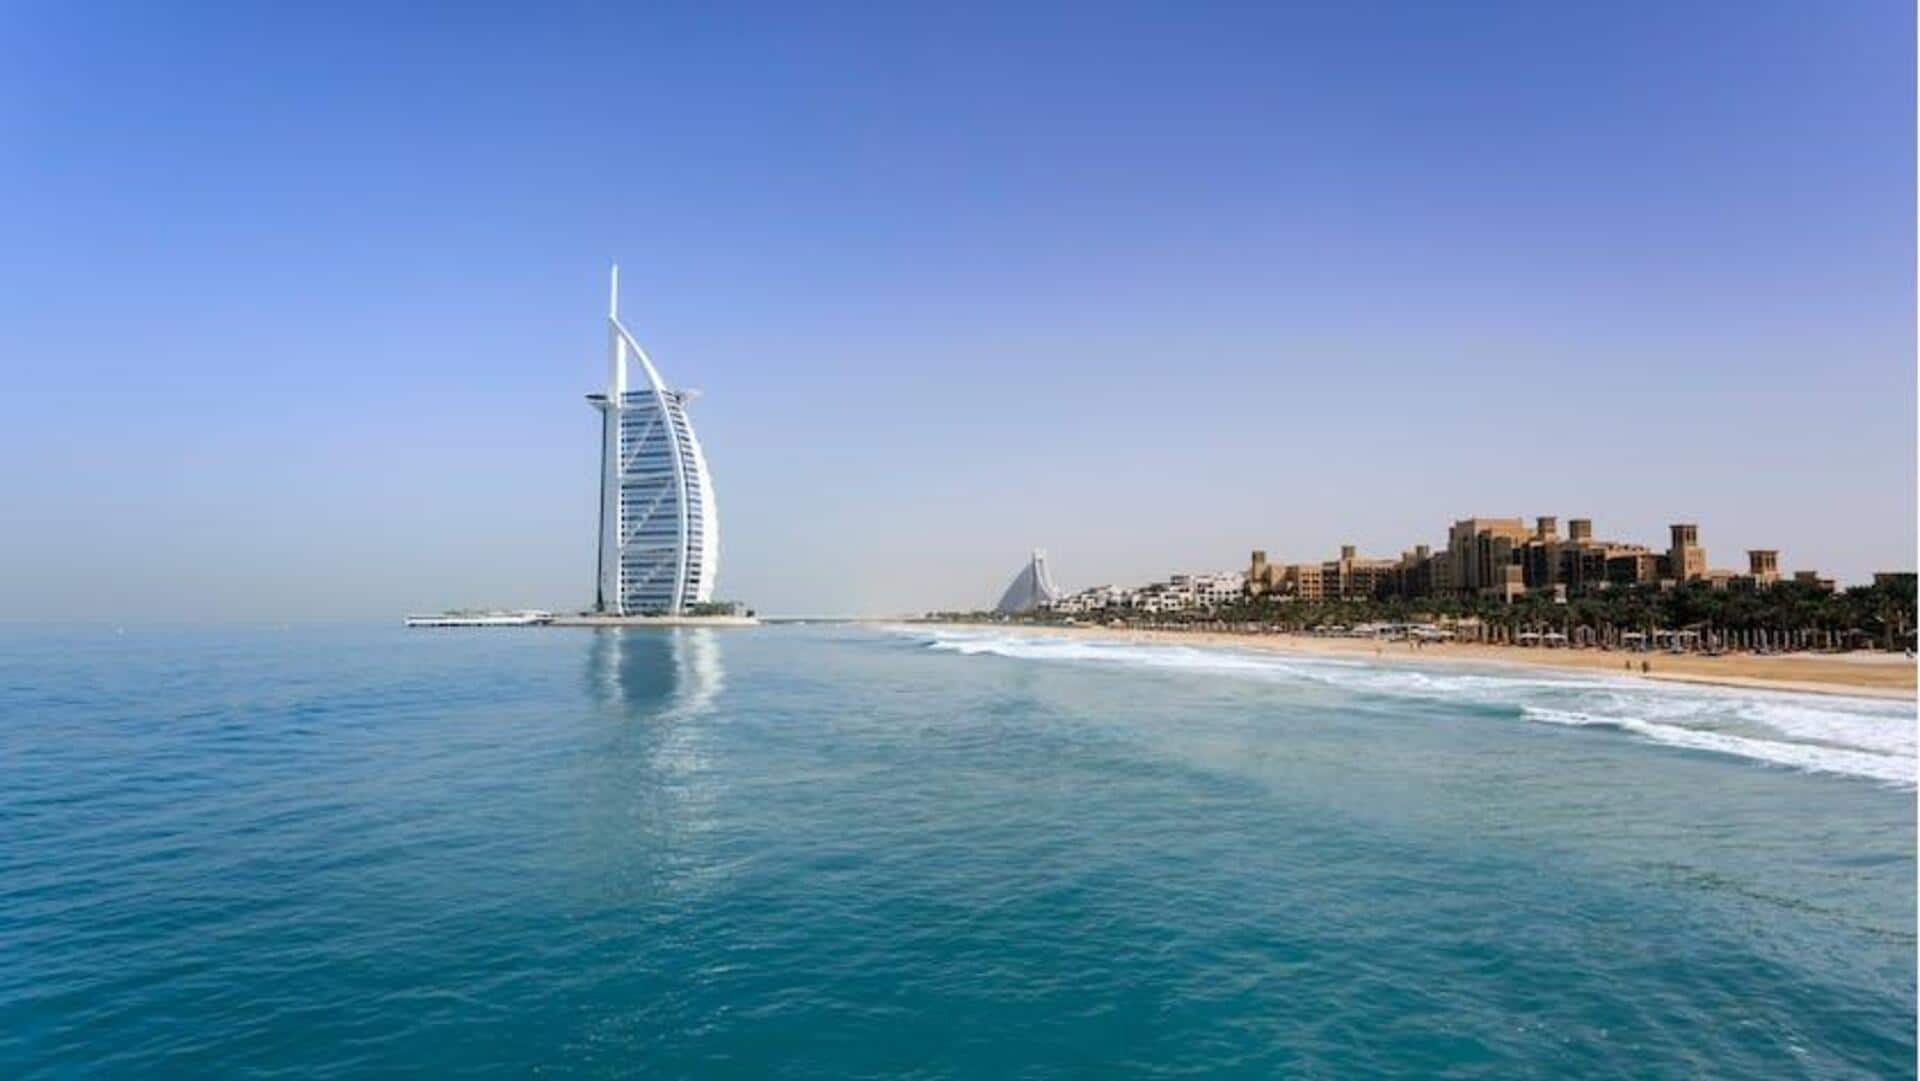 Visiting Dubai? Here are the top things to do